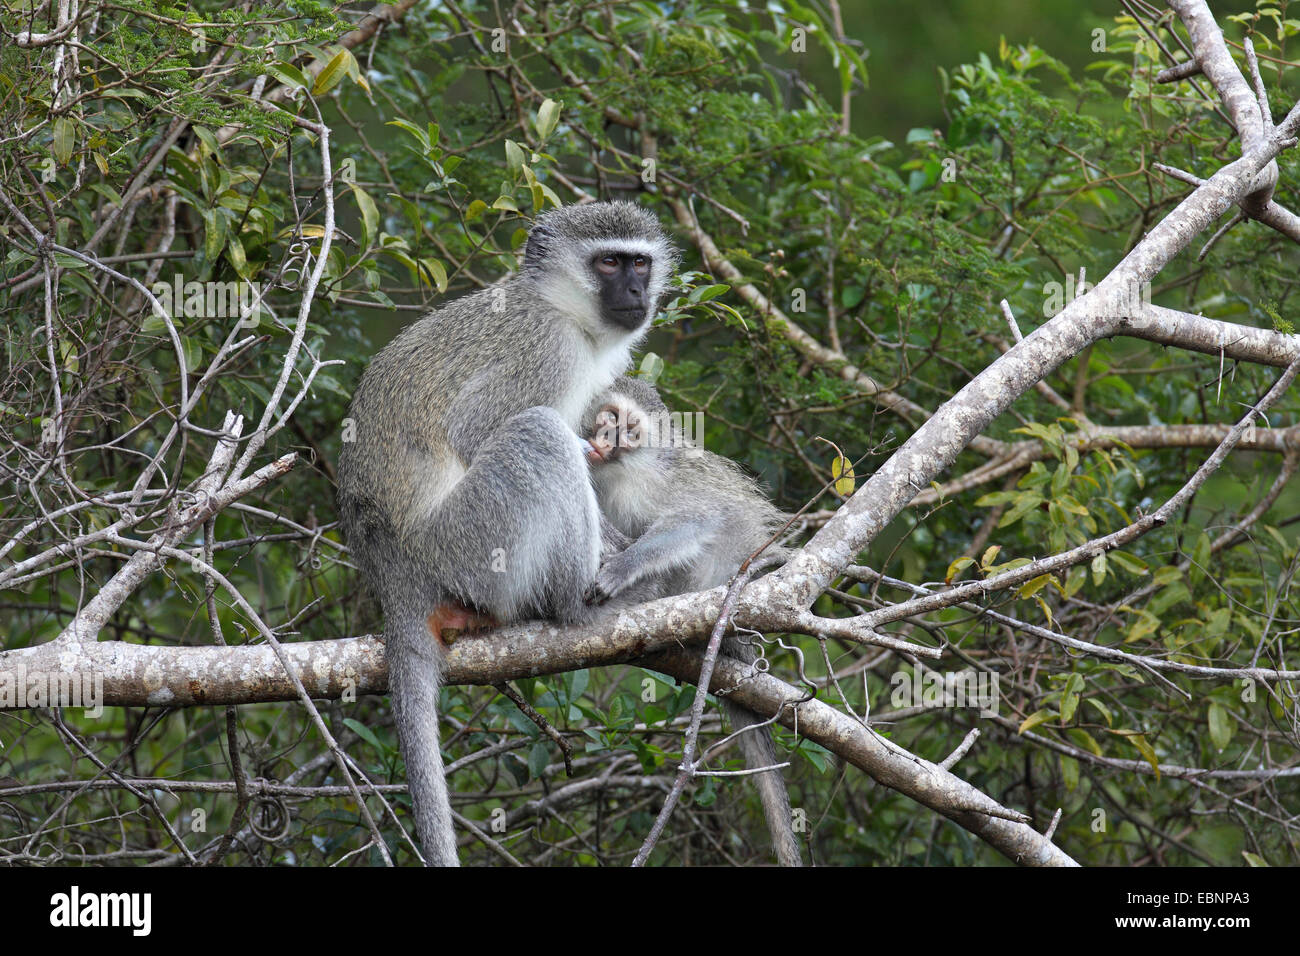 Grivet monkey, Savanna monkey, Green monkey, Vervet monkey (Cercopithecus aethiops), female with young animal sitting on a tree, little monkey suckling by the mother, South Africa, St. Lucia Wetland Park Stock Photo